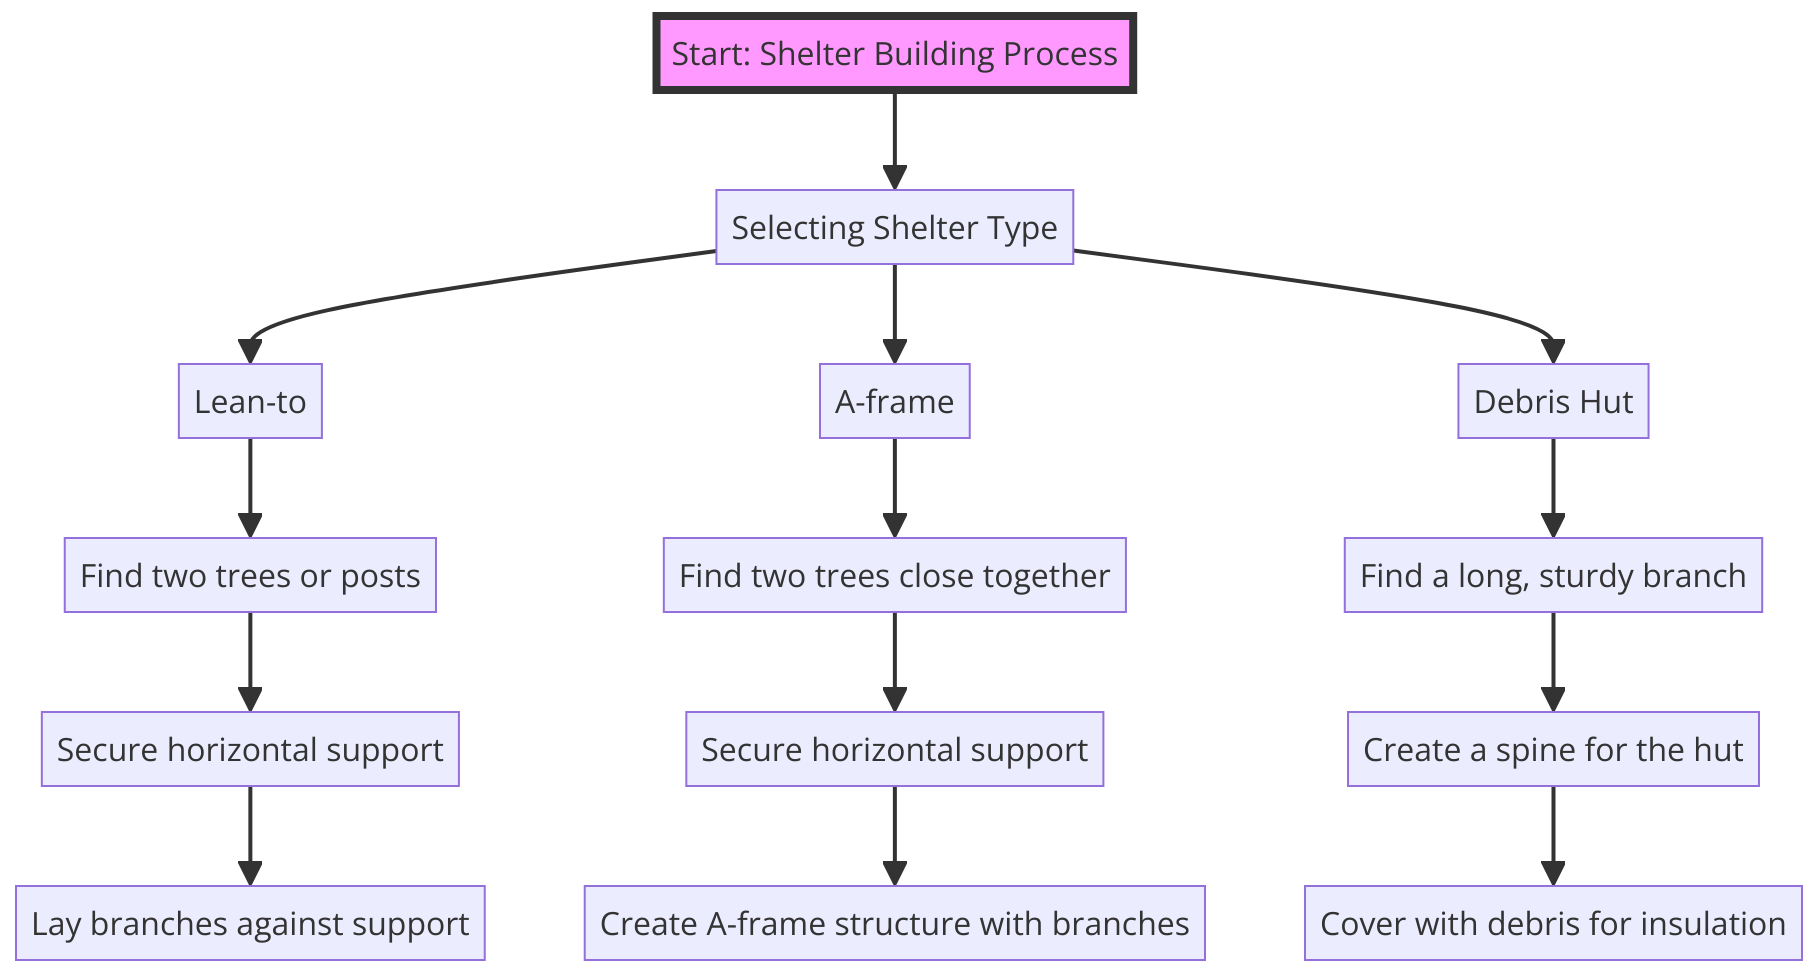 the process for setting up different types of shelters, including Lean-to, A-frame, and Debris hut, and detailing each step from selecting the shelter type to the final construction